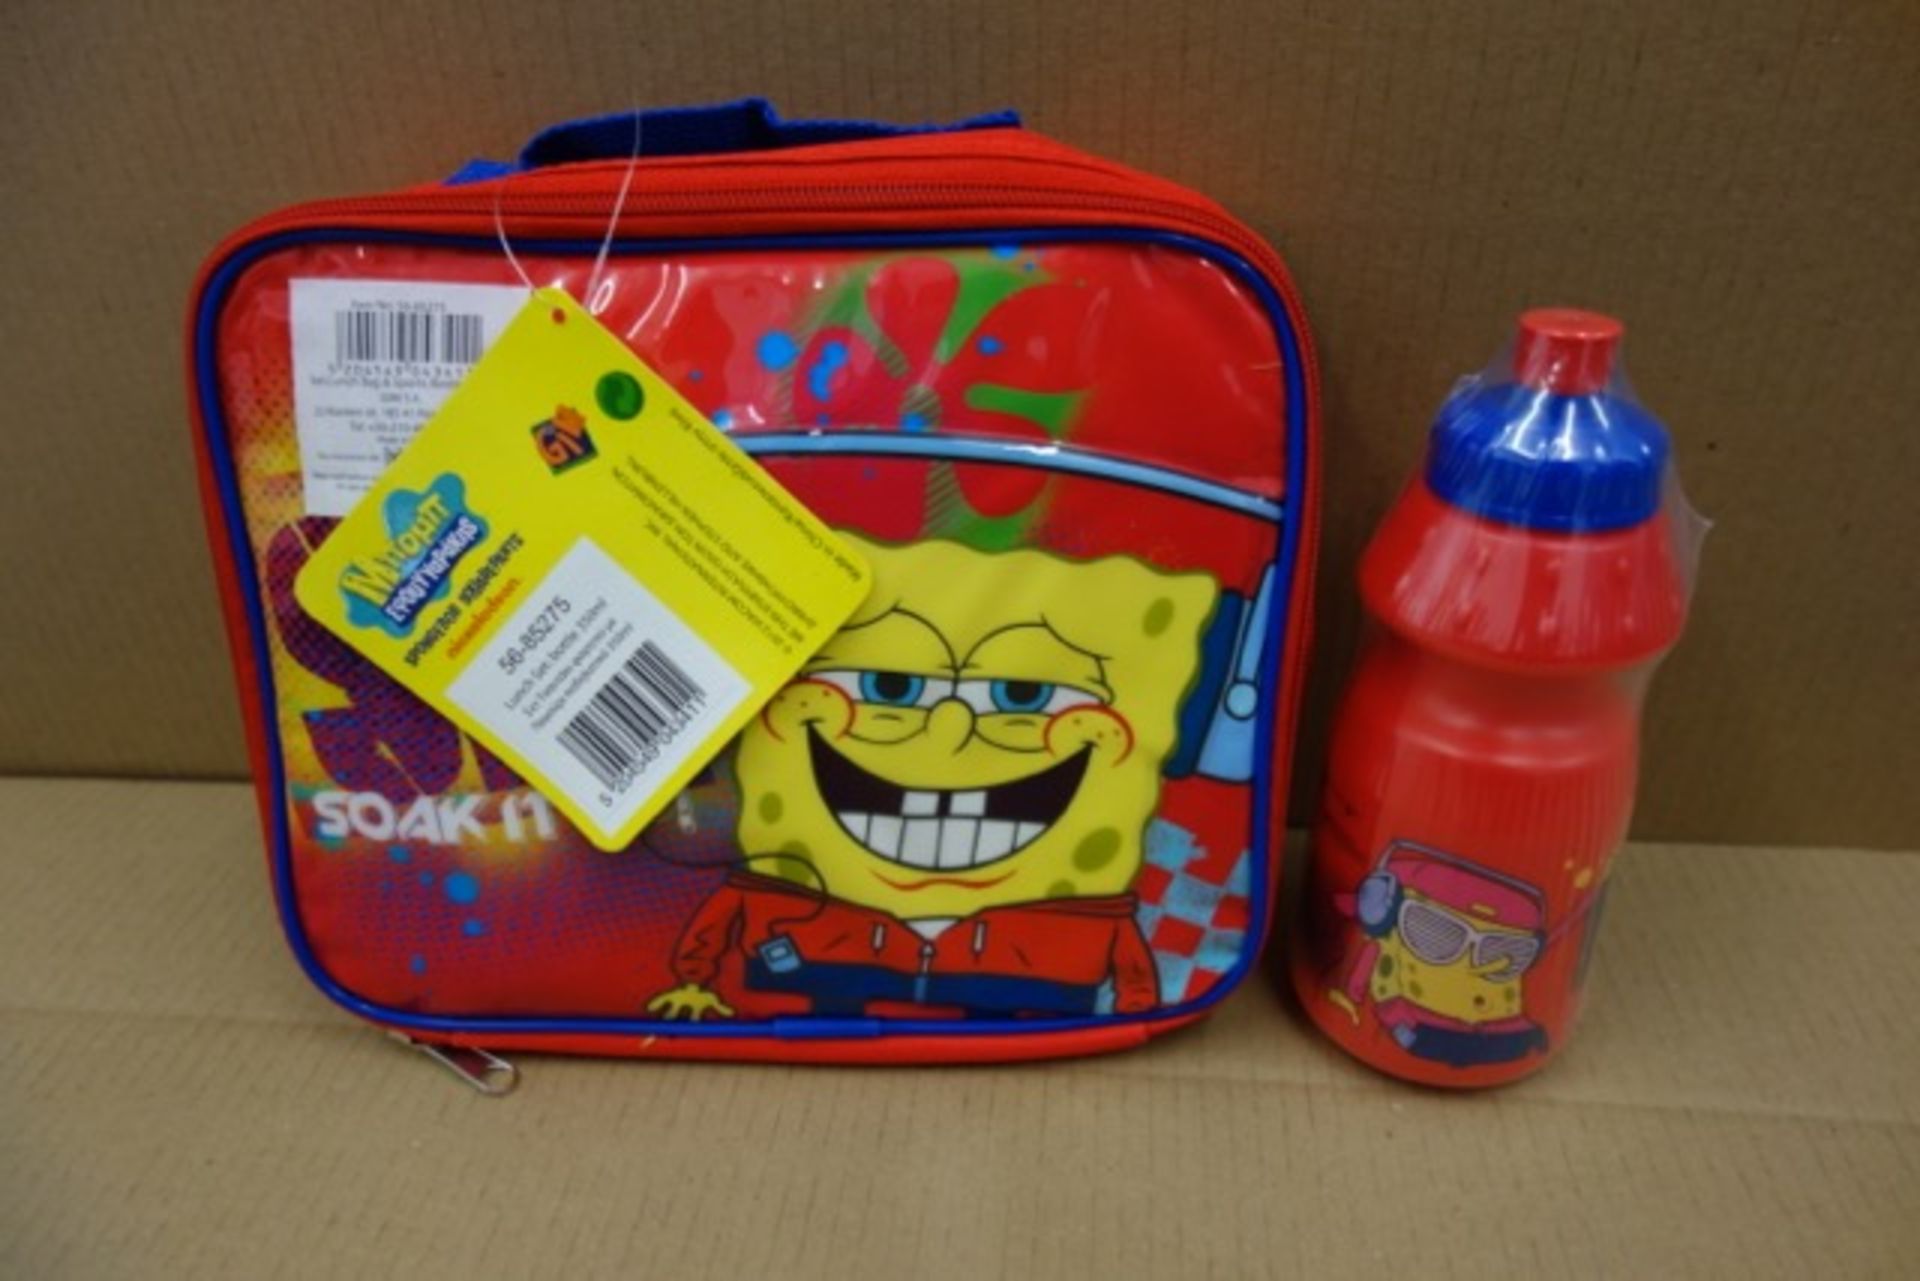 48 x Nickelodeon Spongebob Squarepants Lunch Set with 350ml Sports Bottle. RRP £12.99 each, giving